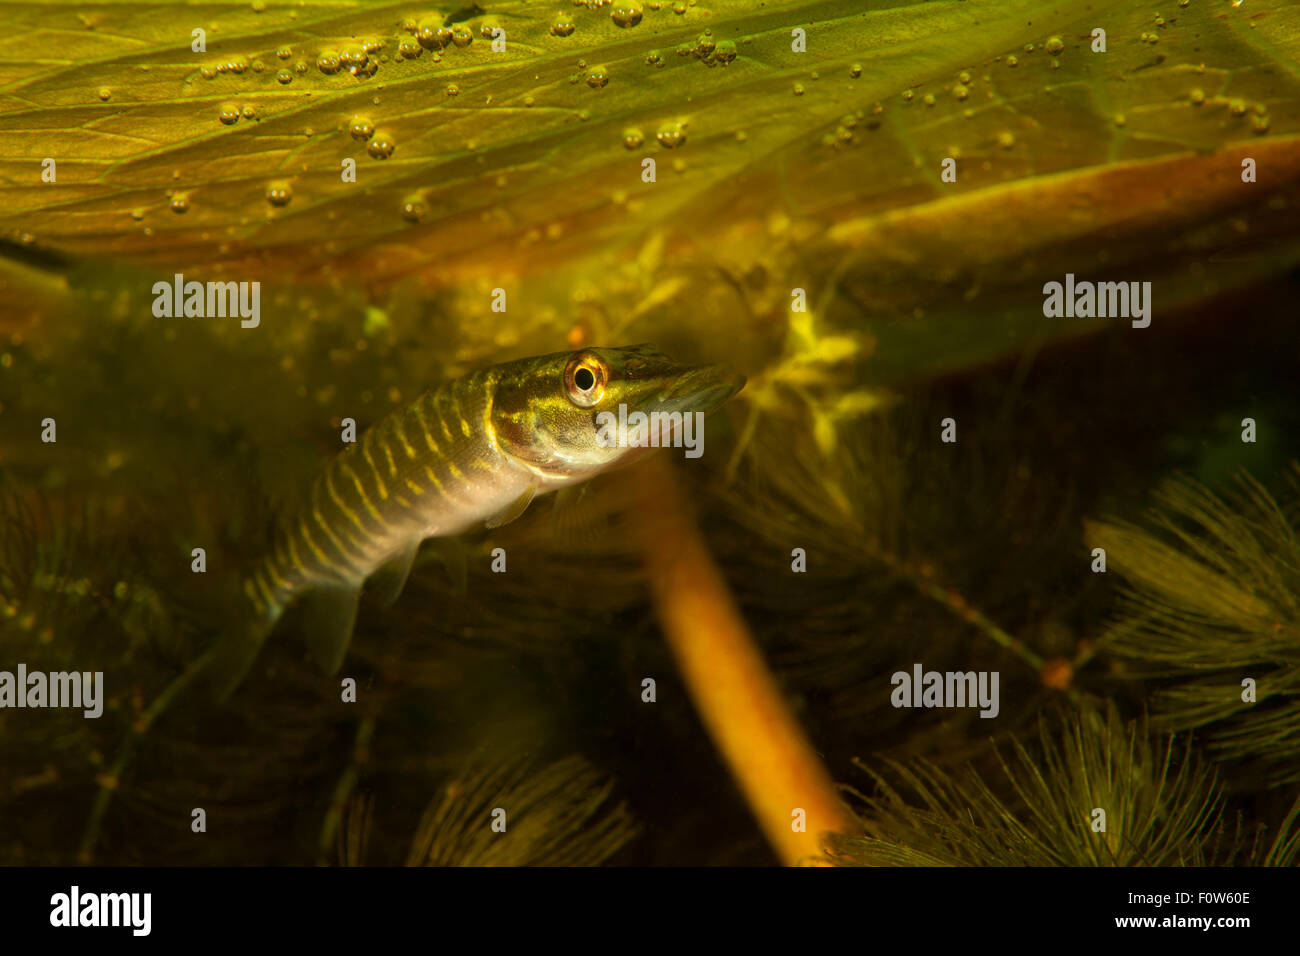 Northern pike (Esox lucius) hiding in the shadow of water lily leaves, Danube Delta, Romania, June. Stock Photo